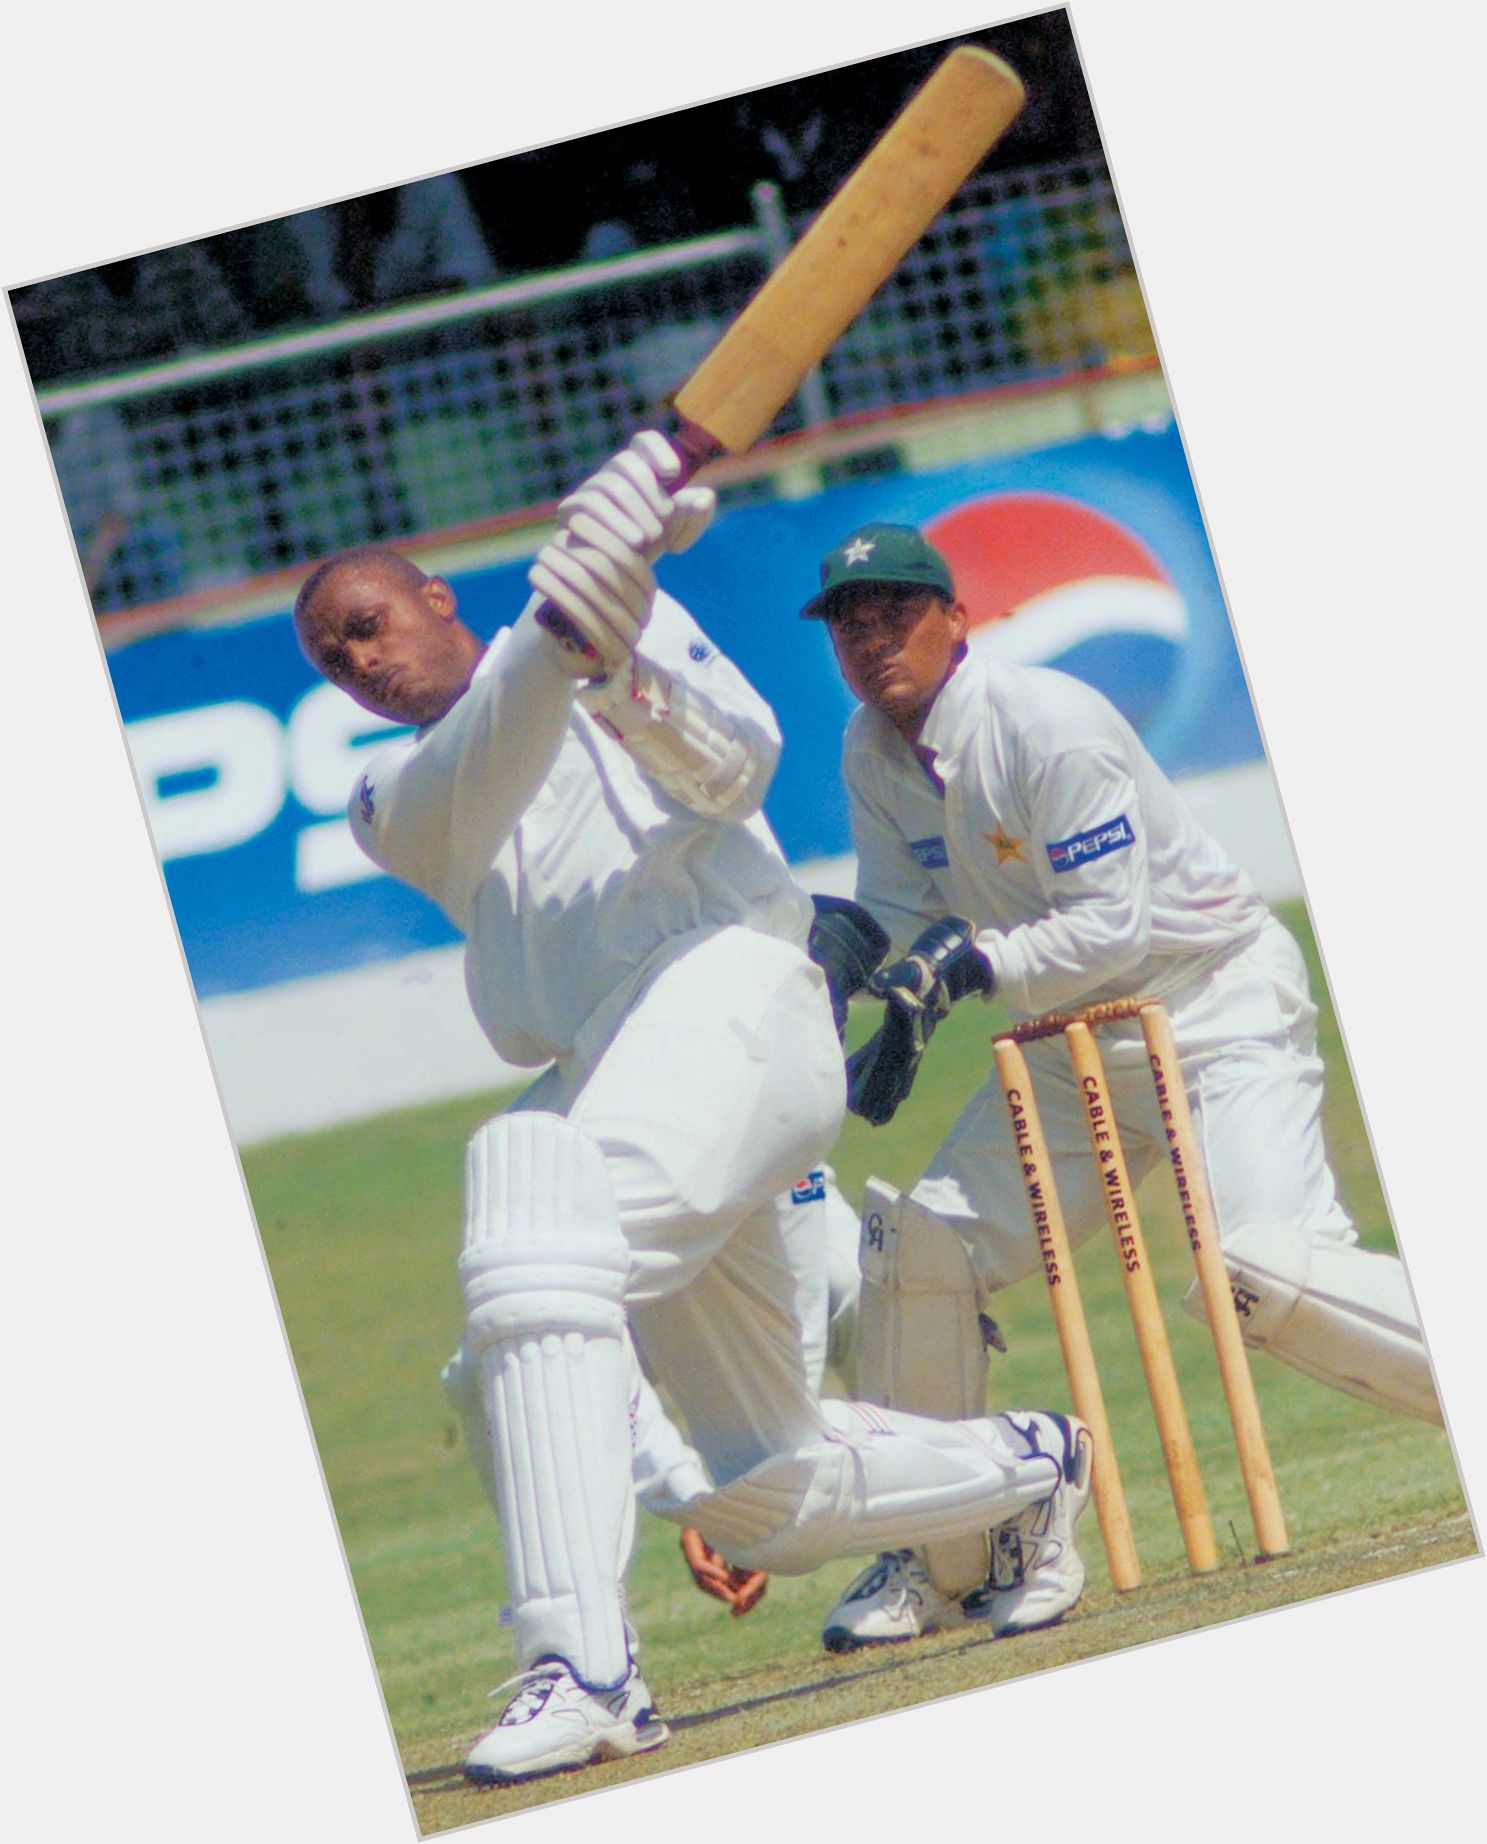 Courtney Walsh new pic 3.jpg